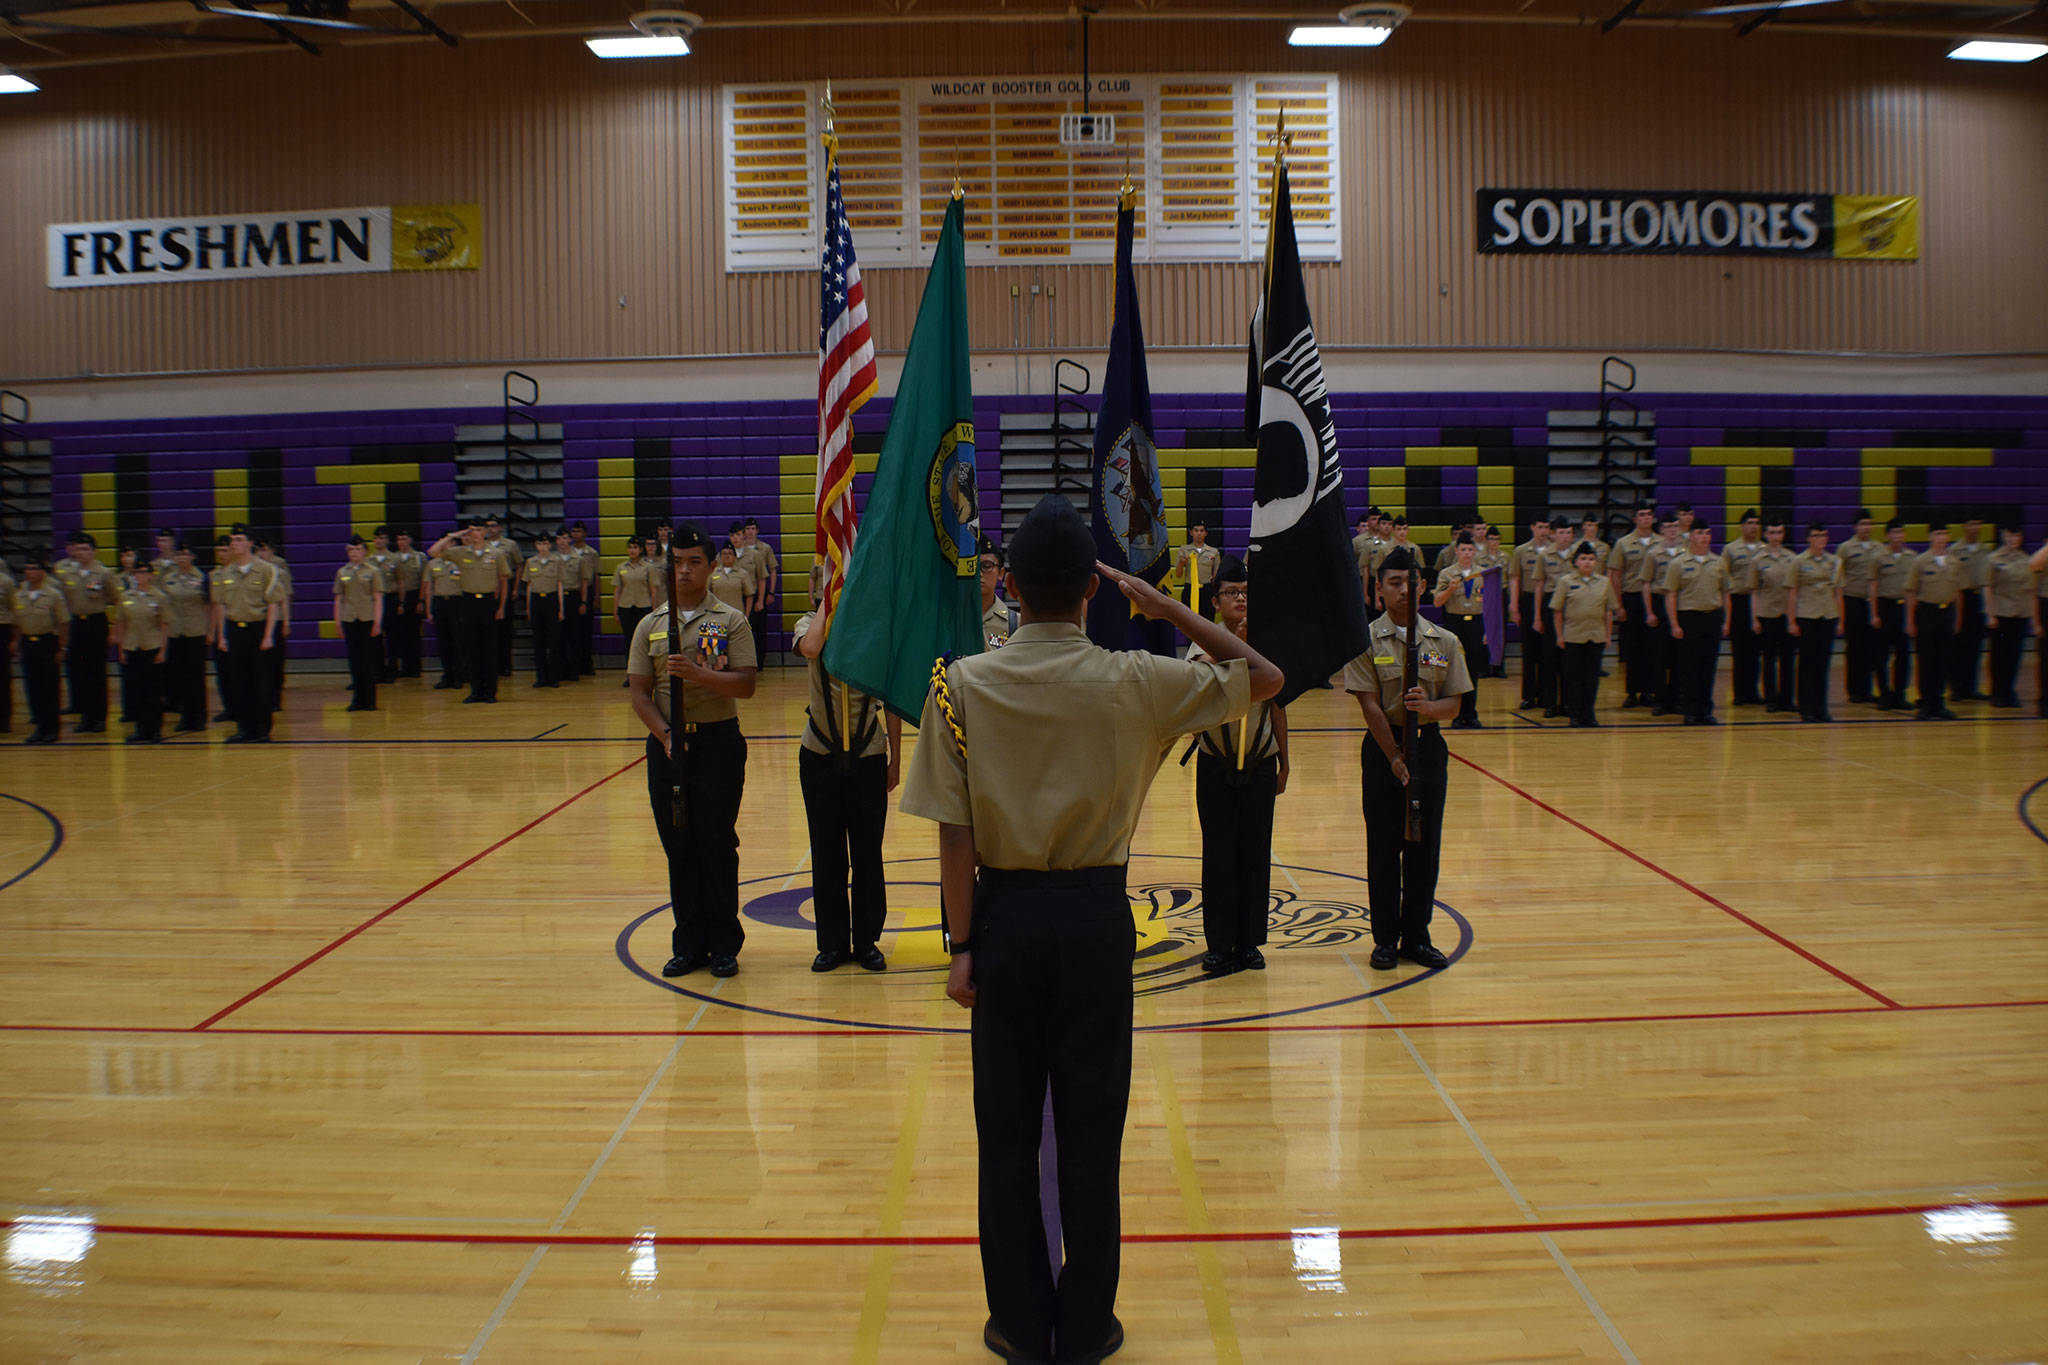 The battalion is in formation for the presentation of the colors during the awards program.